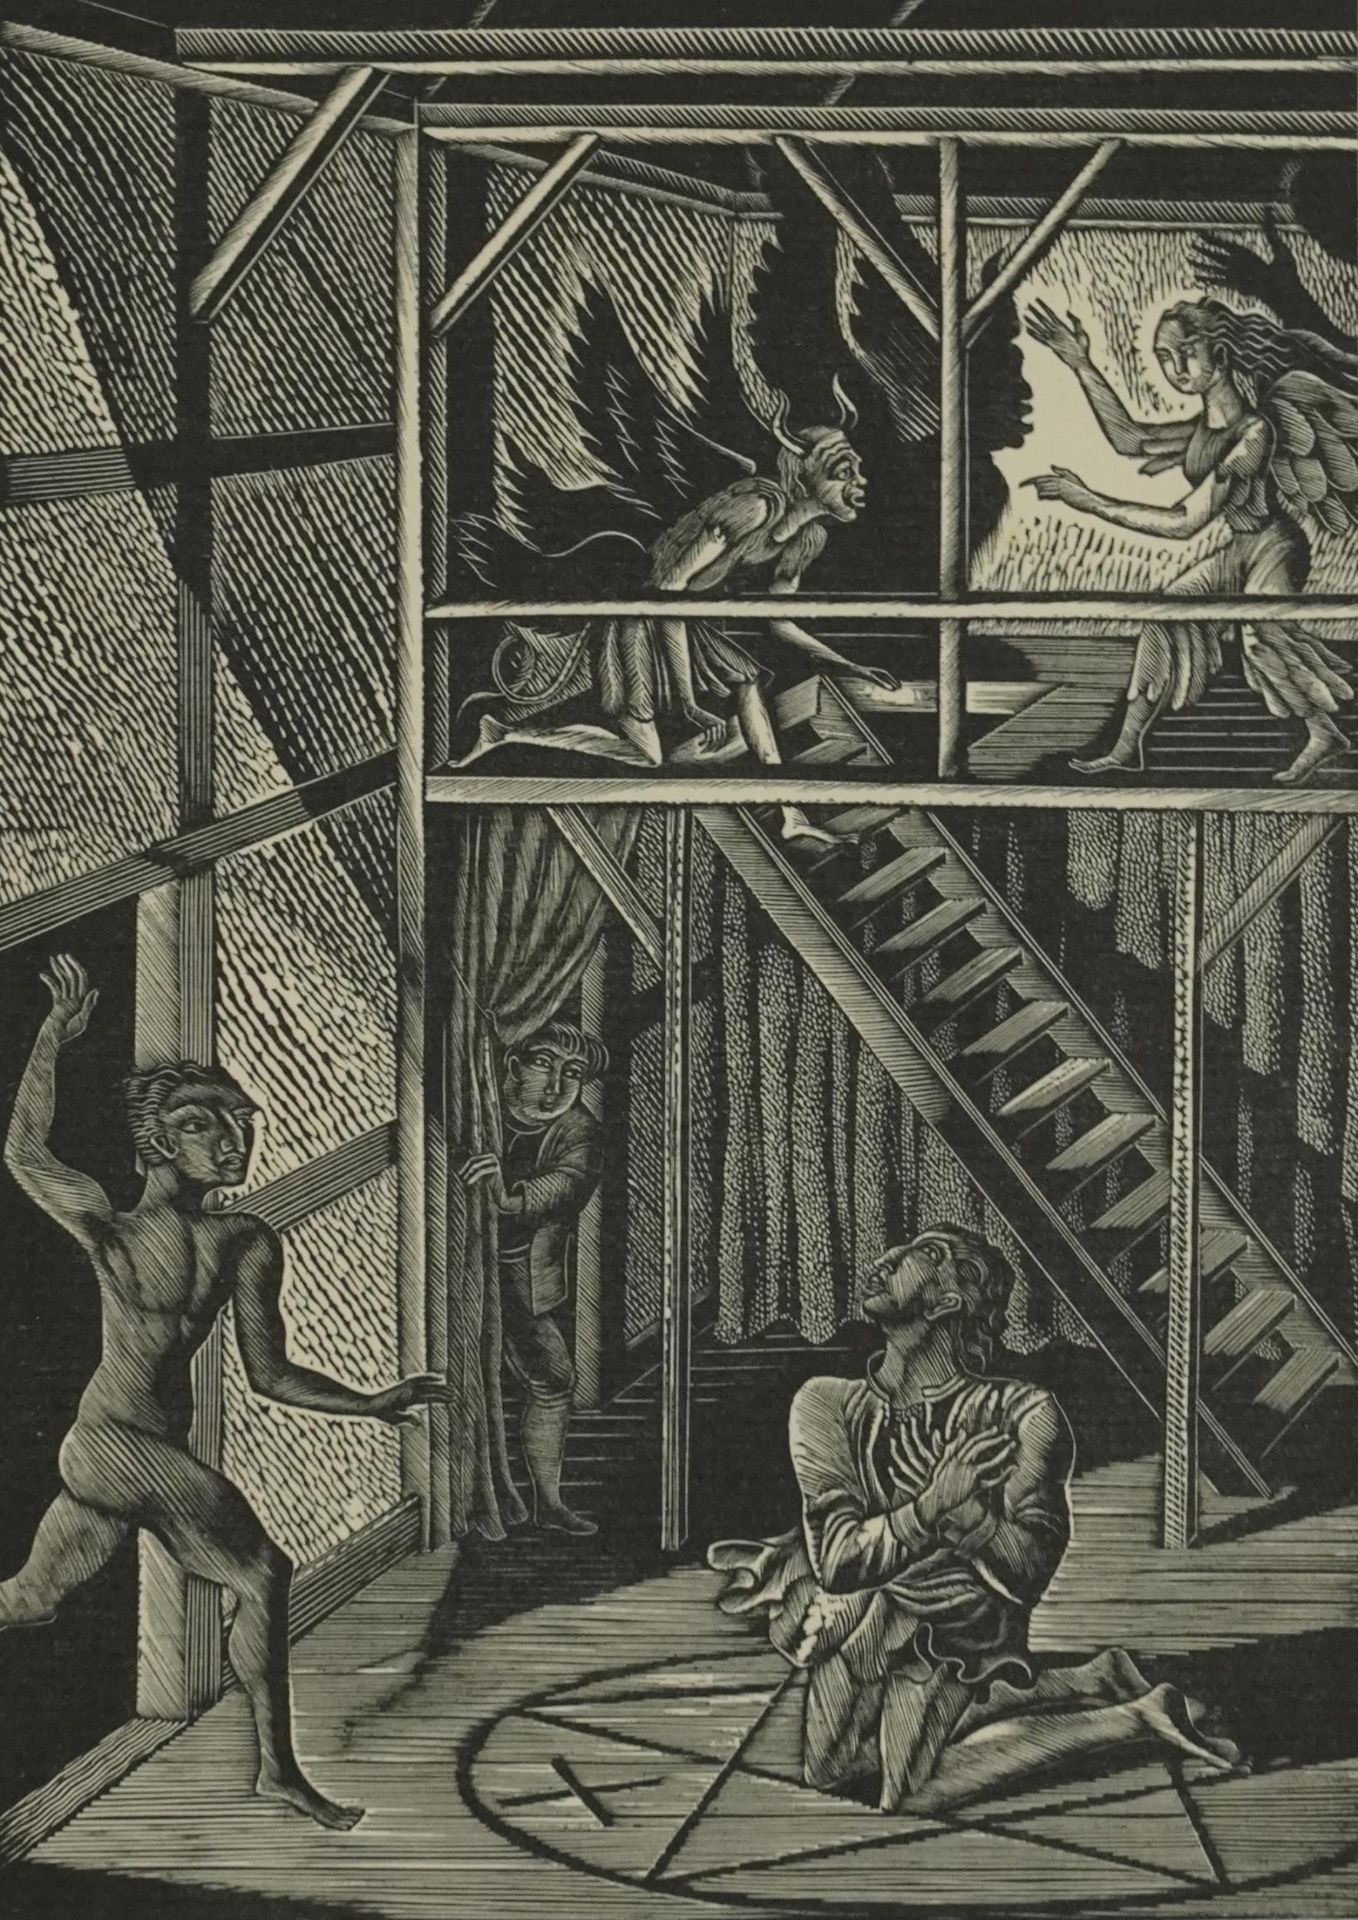 Eric Ravilious - Doctor Faustus conjuring Mephostophilis, inscribed The Legion Book printed by The